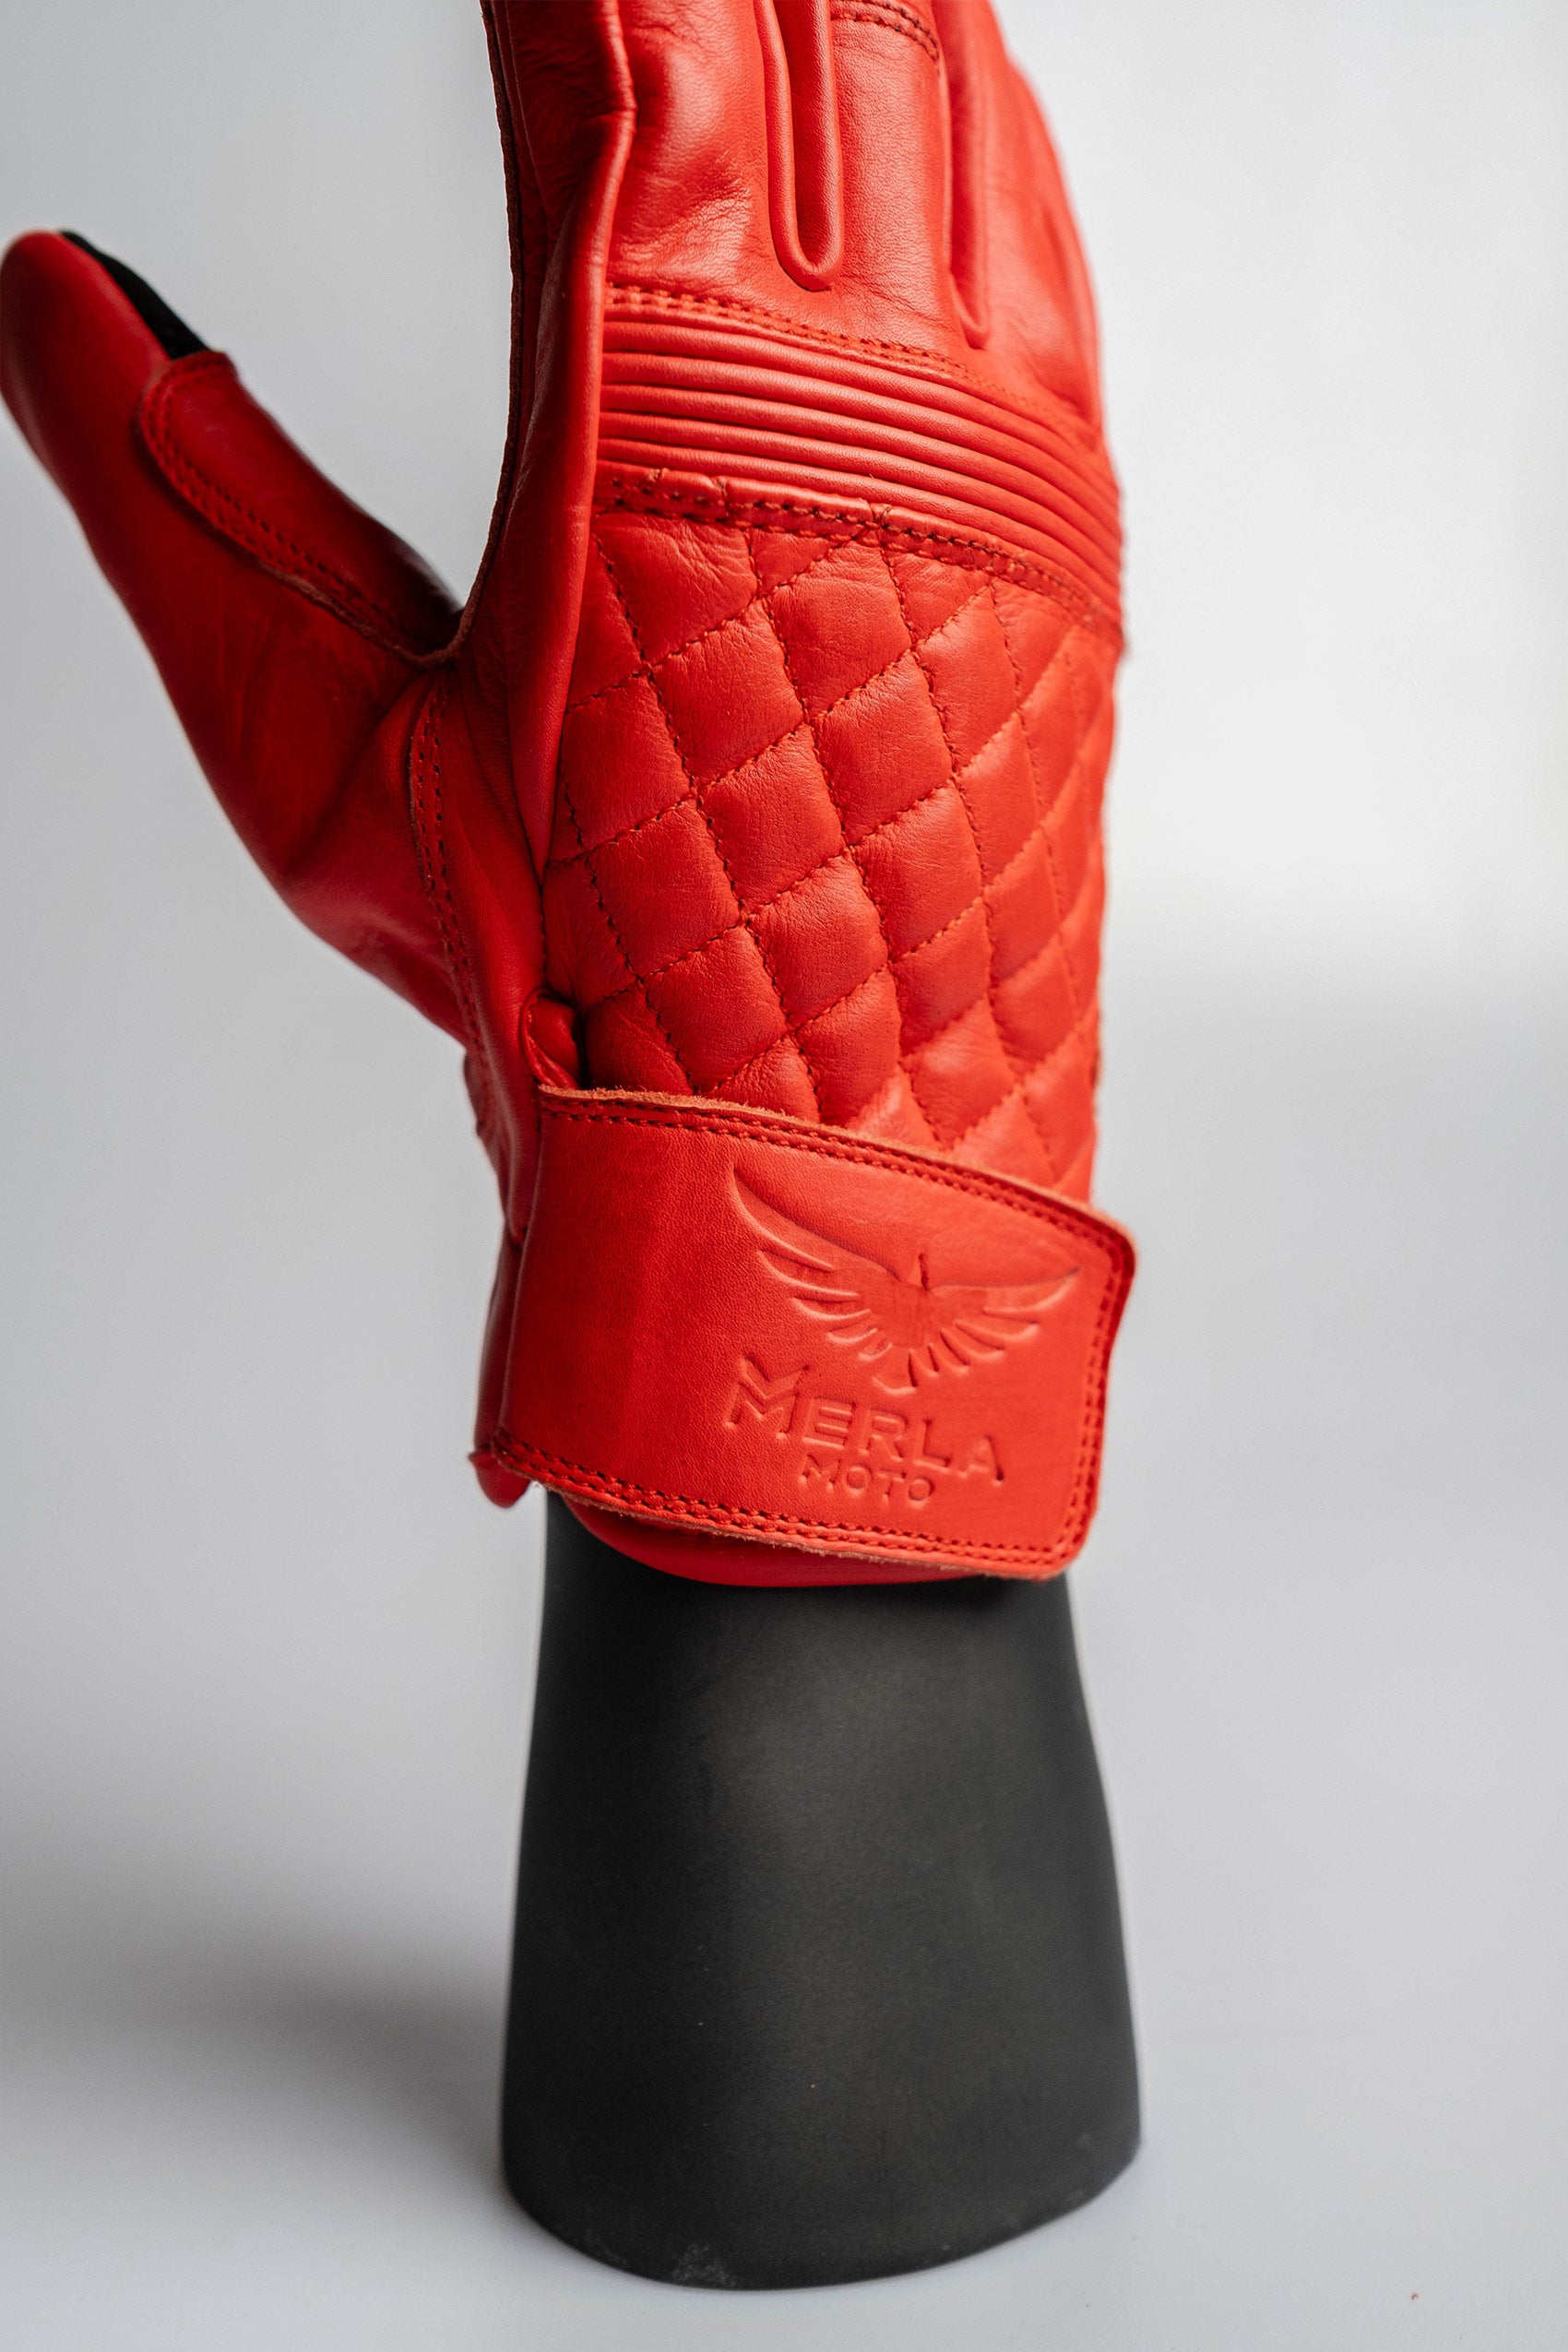 Cafe Quilted Leather Motorcycle Gloves - Red